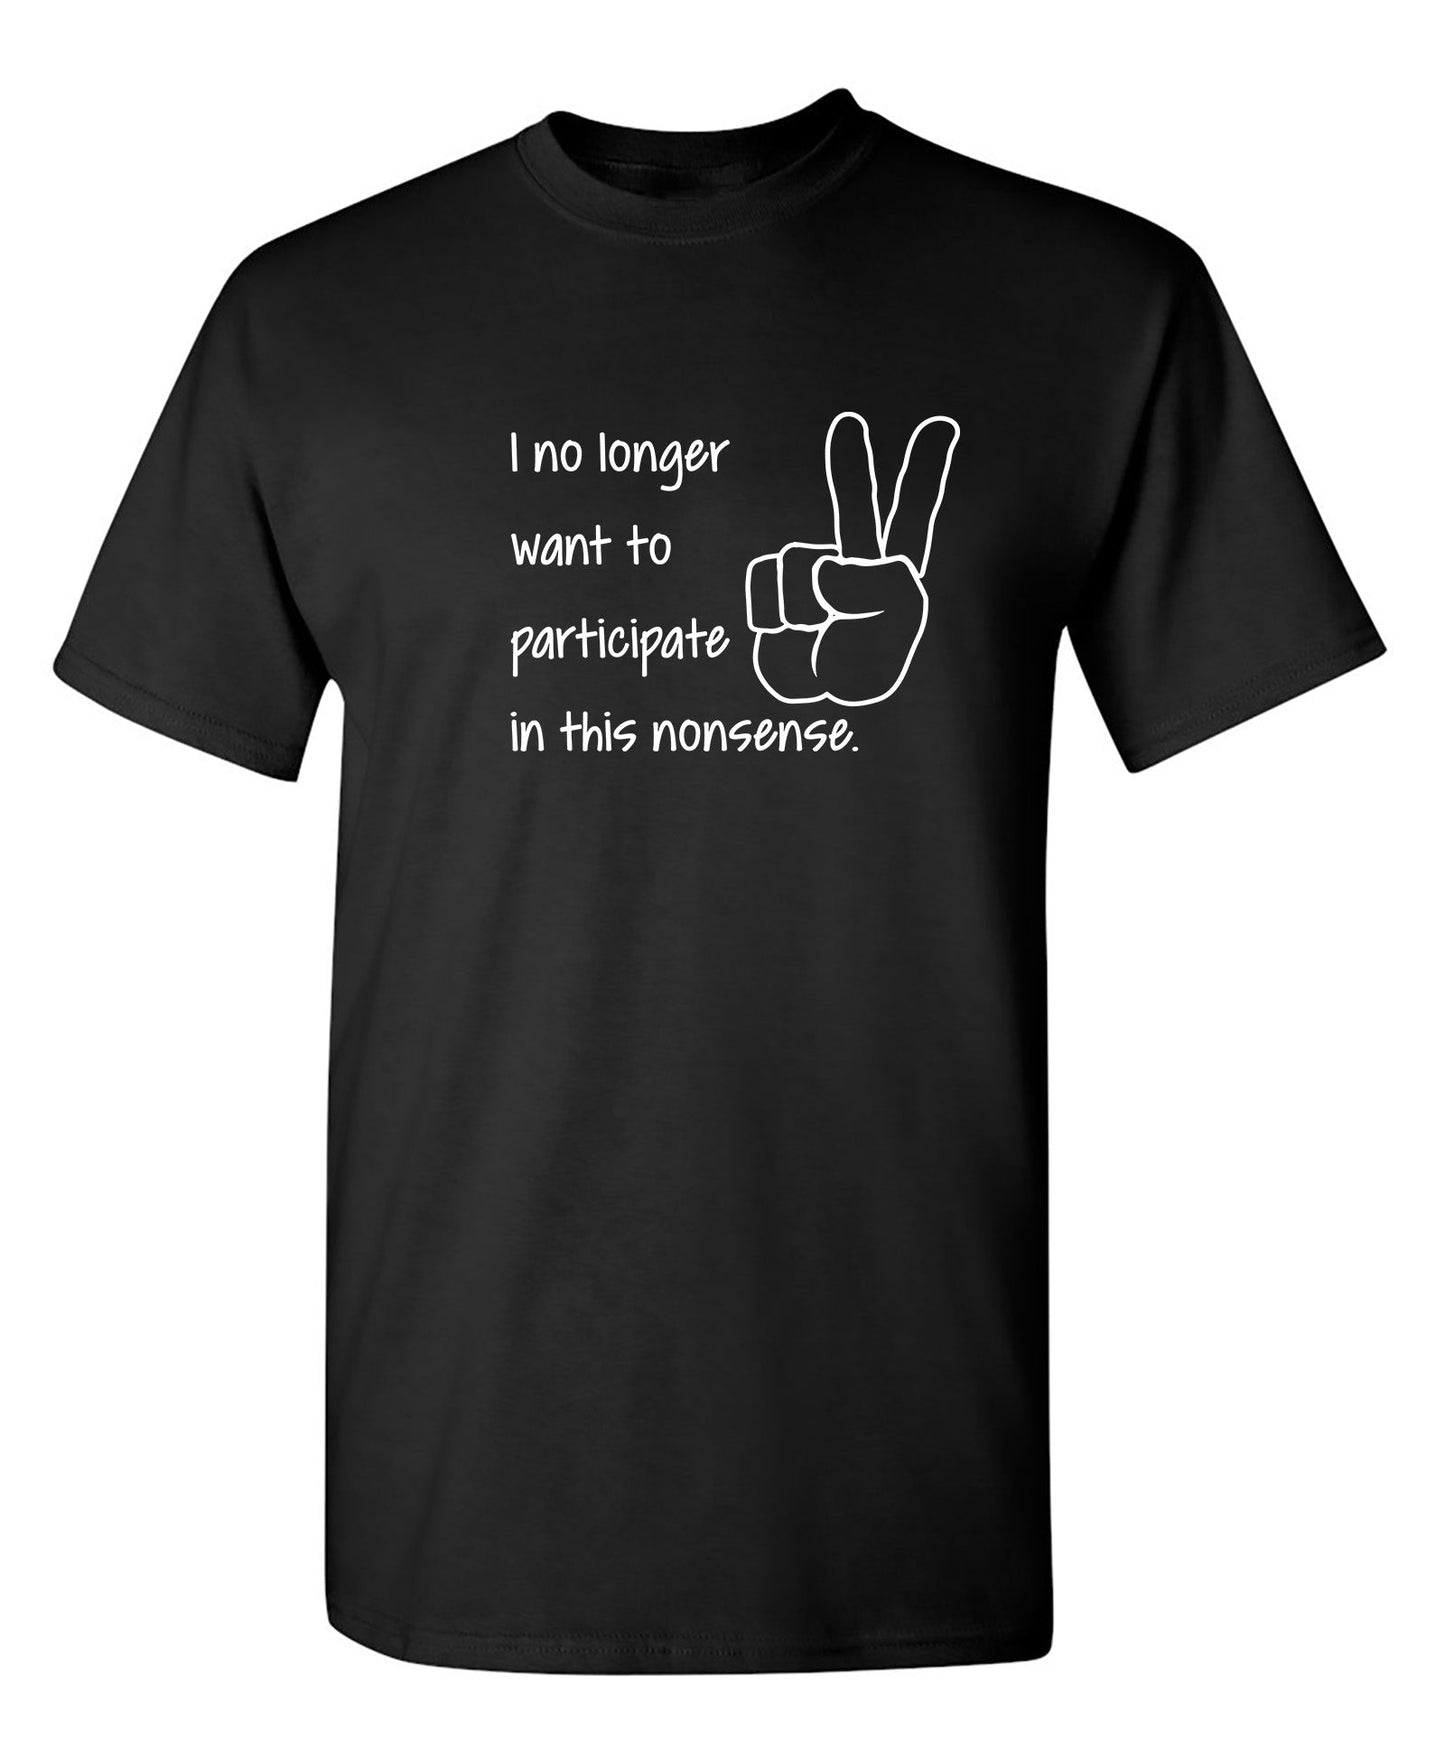 PARTICIPATE - Funny T Shirts & Graphic Tees